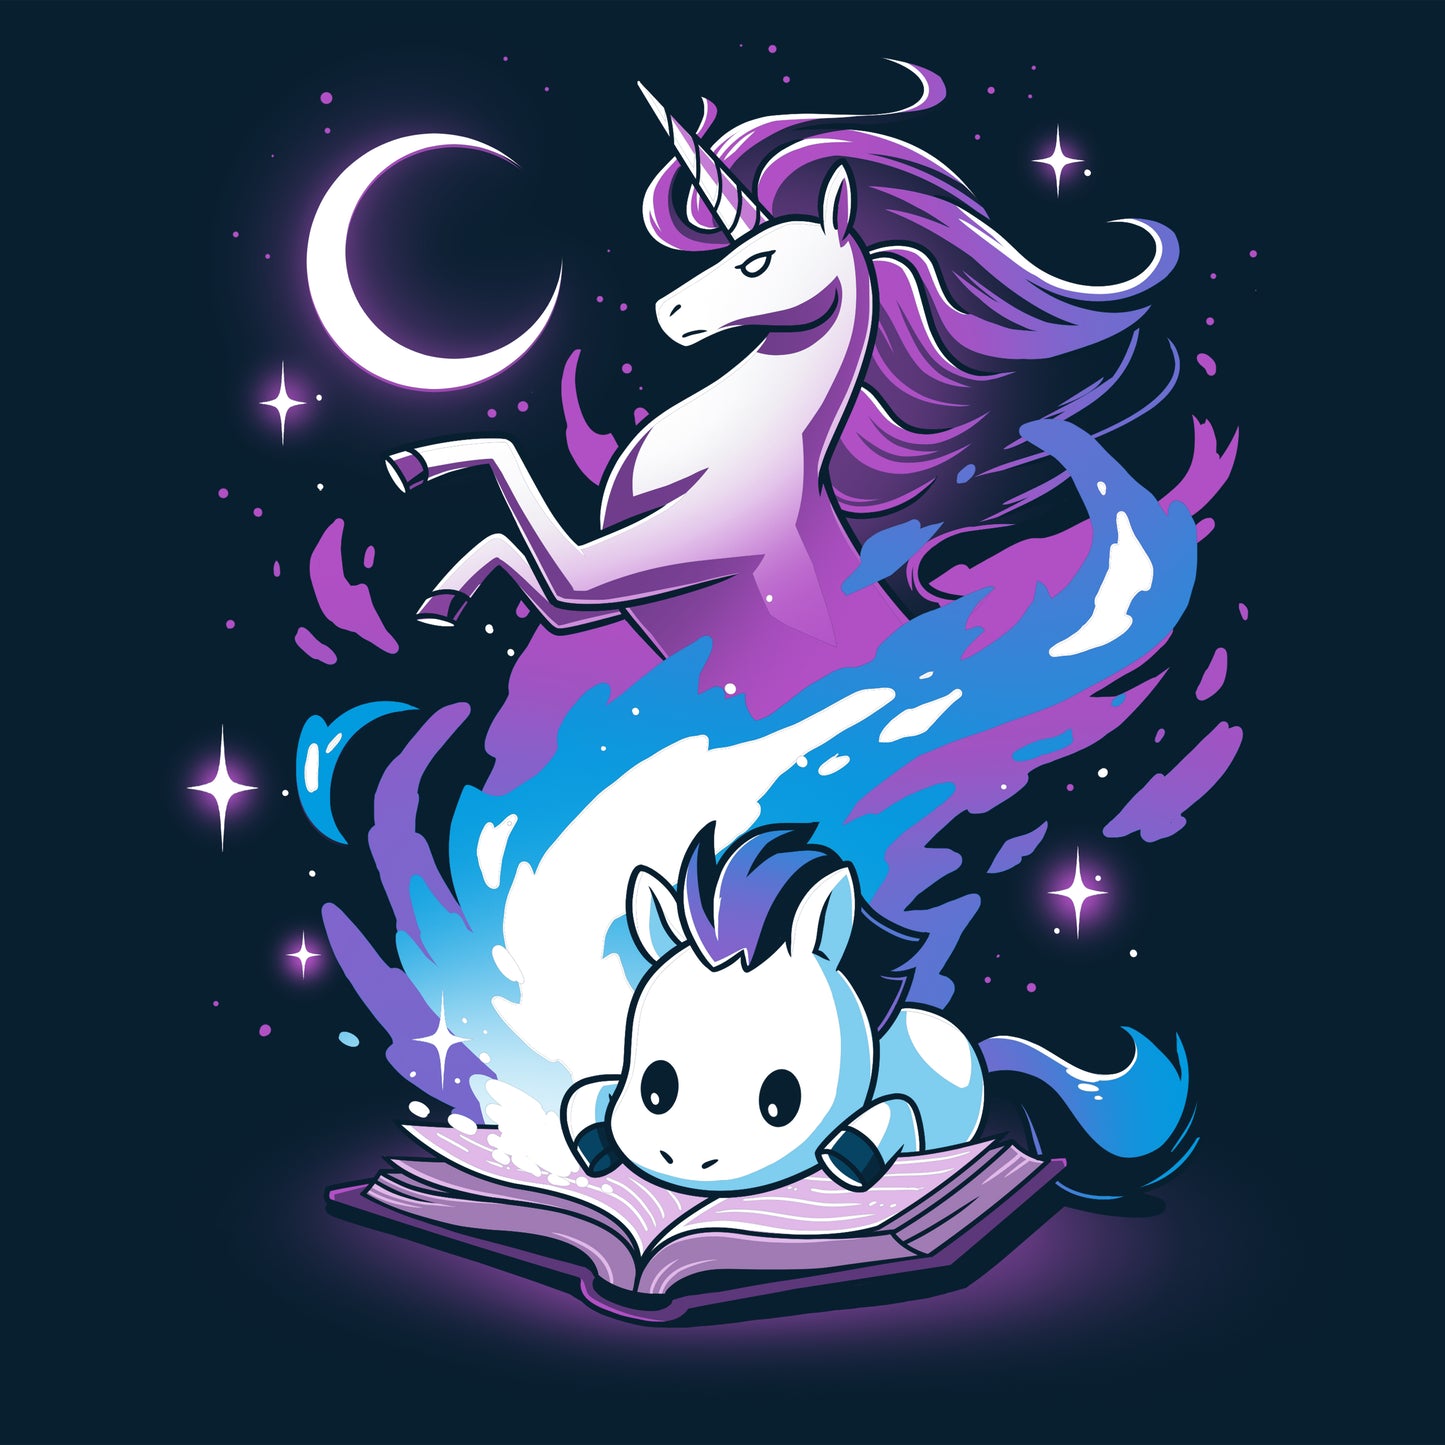 An image of a unicorn on "A Magical Tale" book by TeeTurtle with a moon in the background, combining comfort and fit.